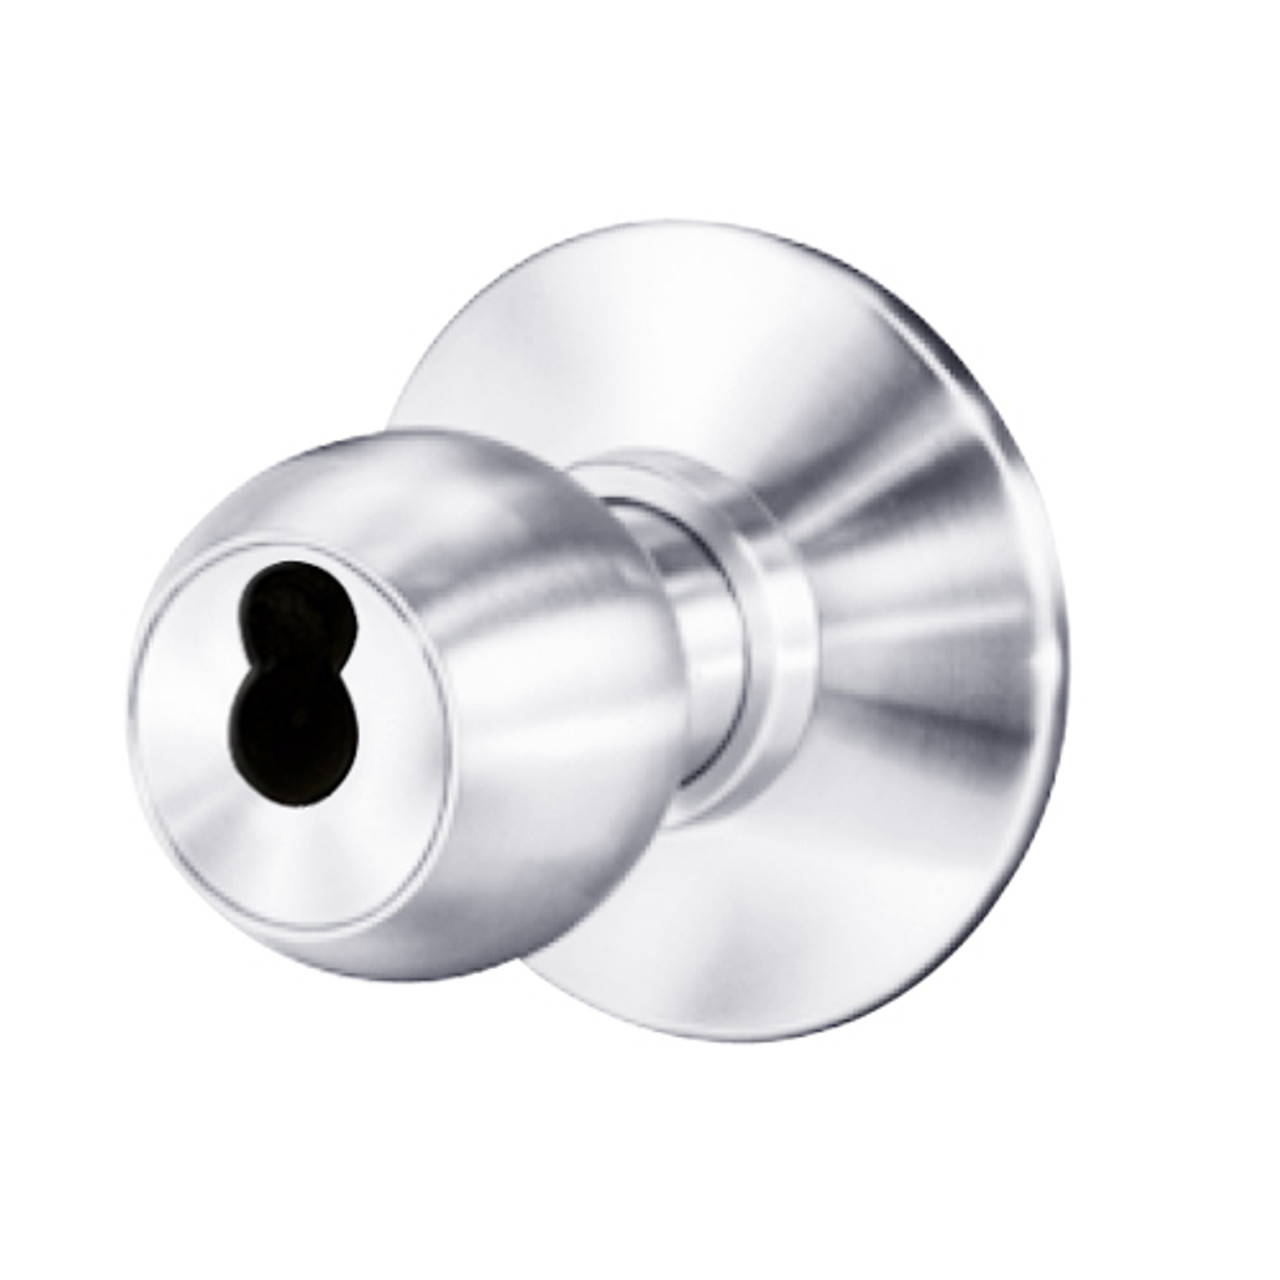 8K37XR4DS3625 Best 8K Series Special Heavy Duty Cylindrical Knob Locks with Round Style in Bright Chrome